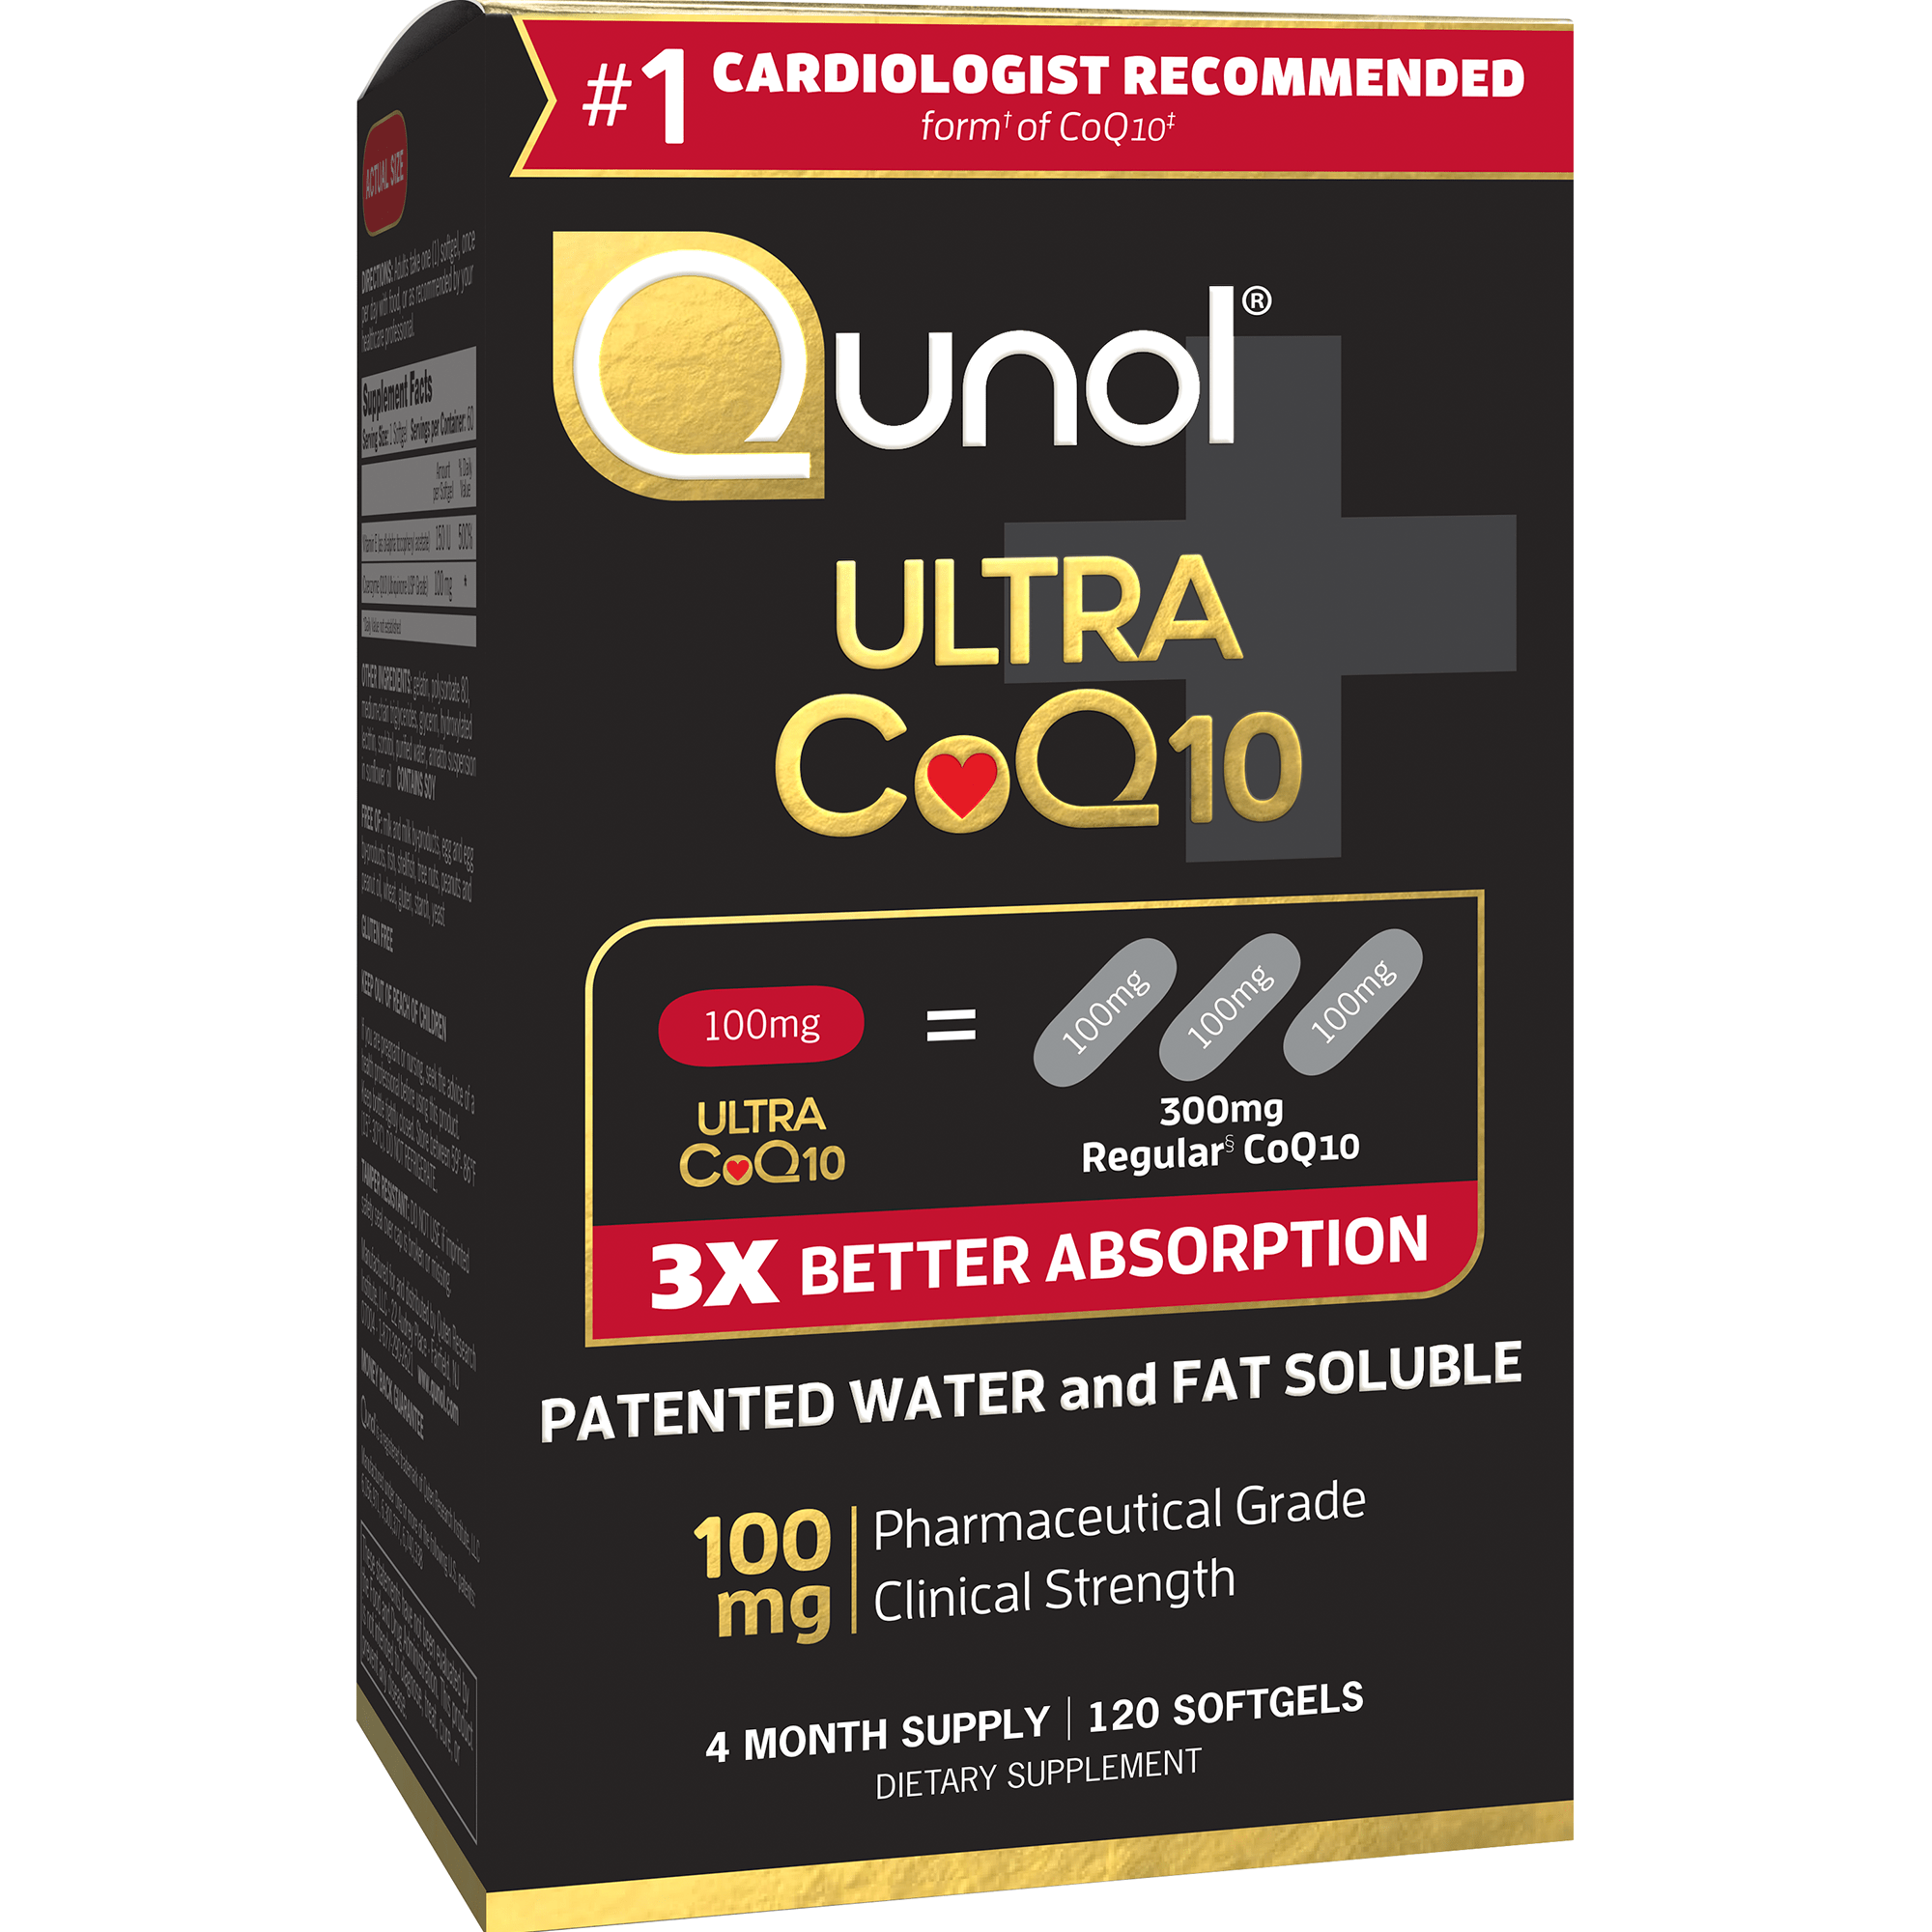 Qunol CoQ10 100mg Softgels, Ultra CoQ10 100mg, 3x Better Absorption, Antioxidant for Heart Health & Energy Production, Coenzyme Q10 Vitamins and Supplements, 4 Month Supply, 120 Count - image 5 of 6